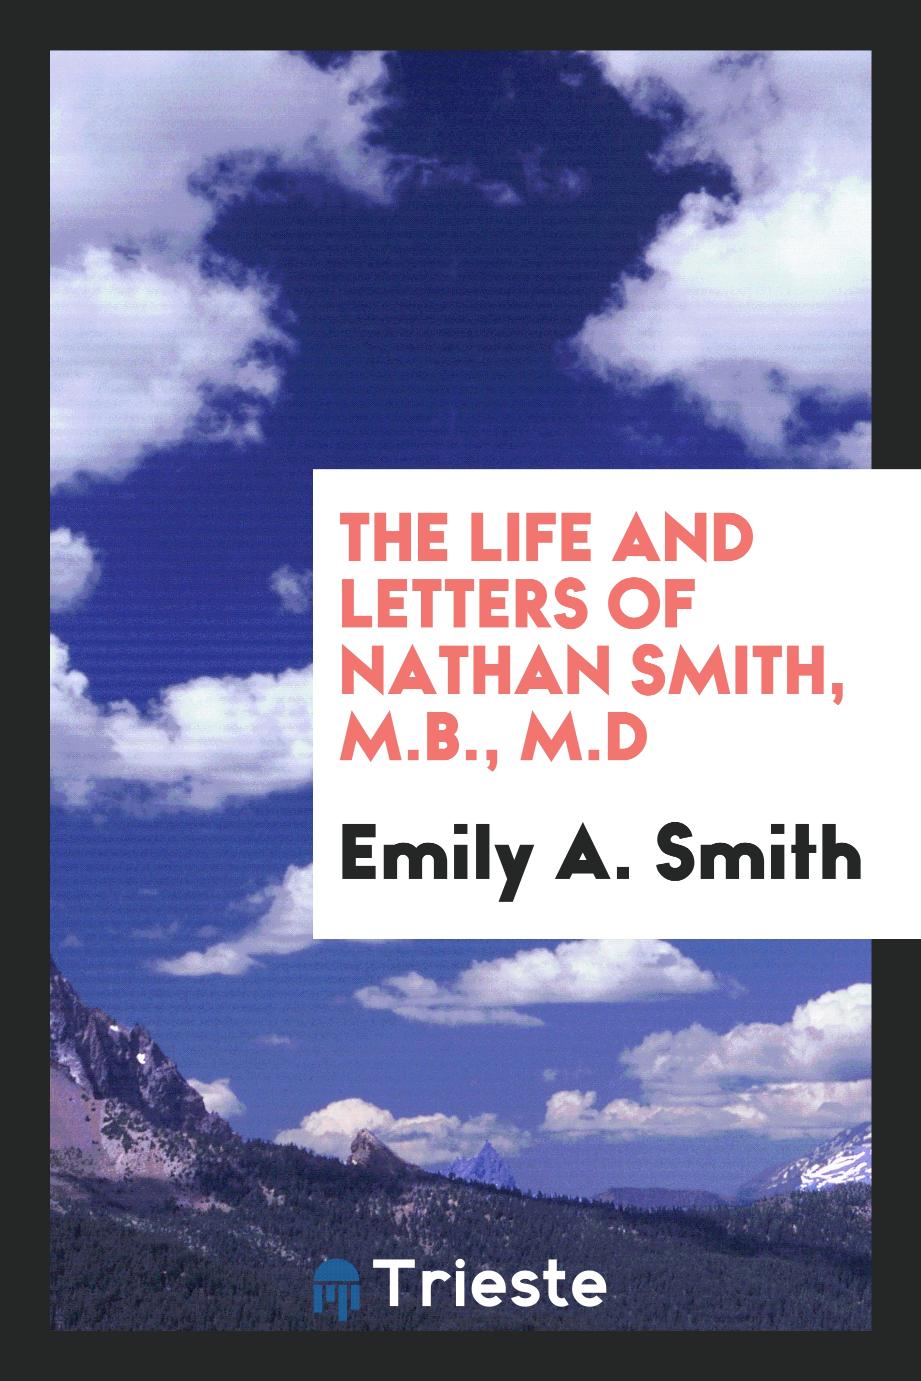 The life and letters of Nathan Smith, M.B., M.D